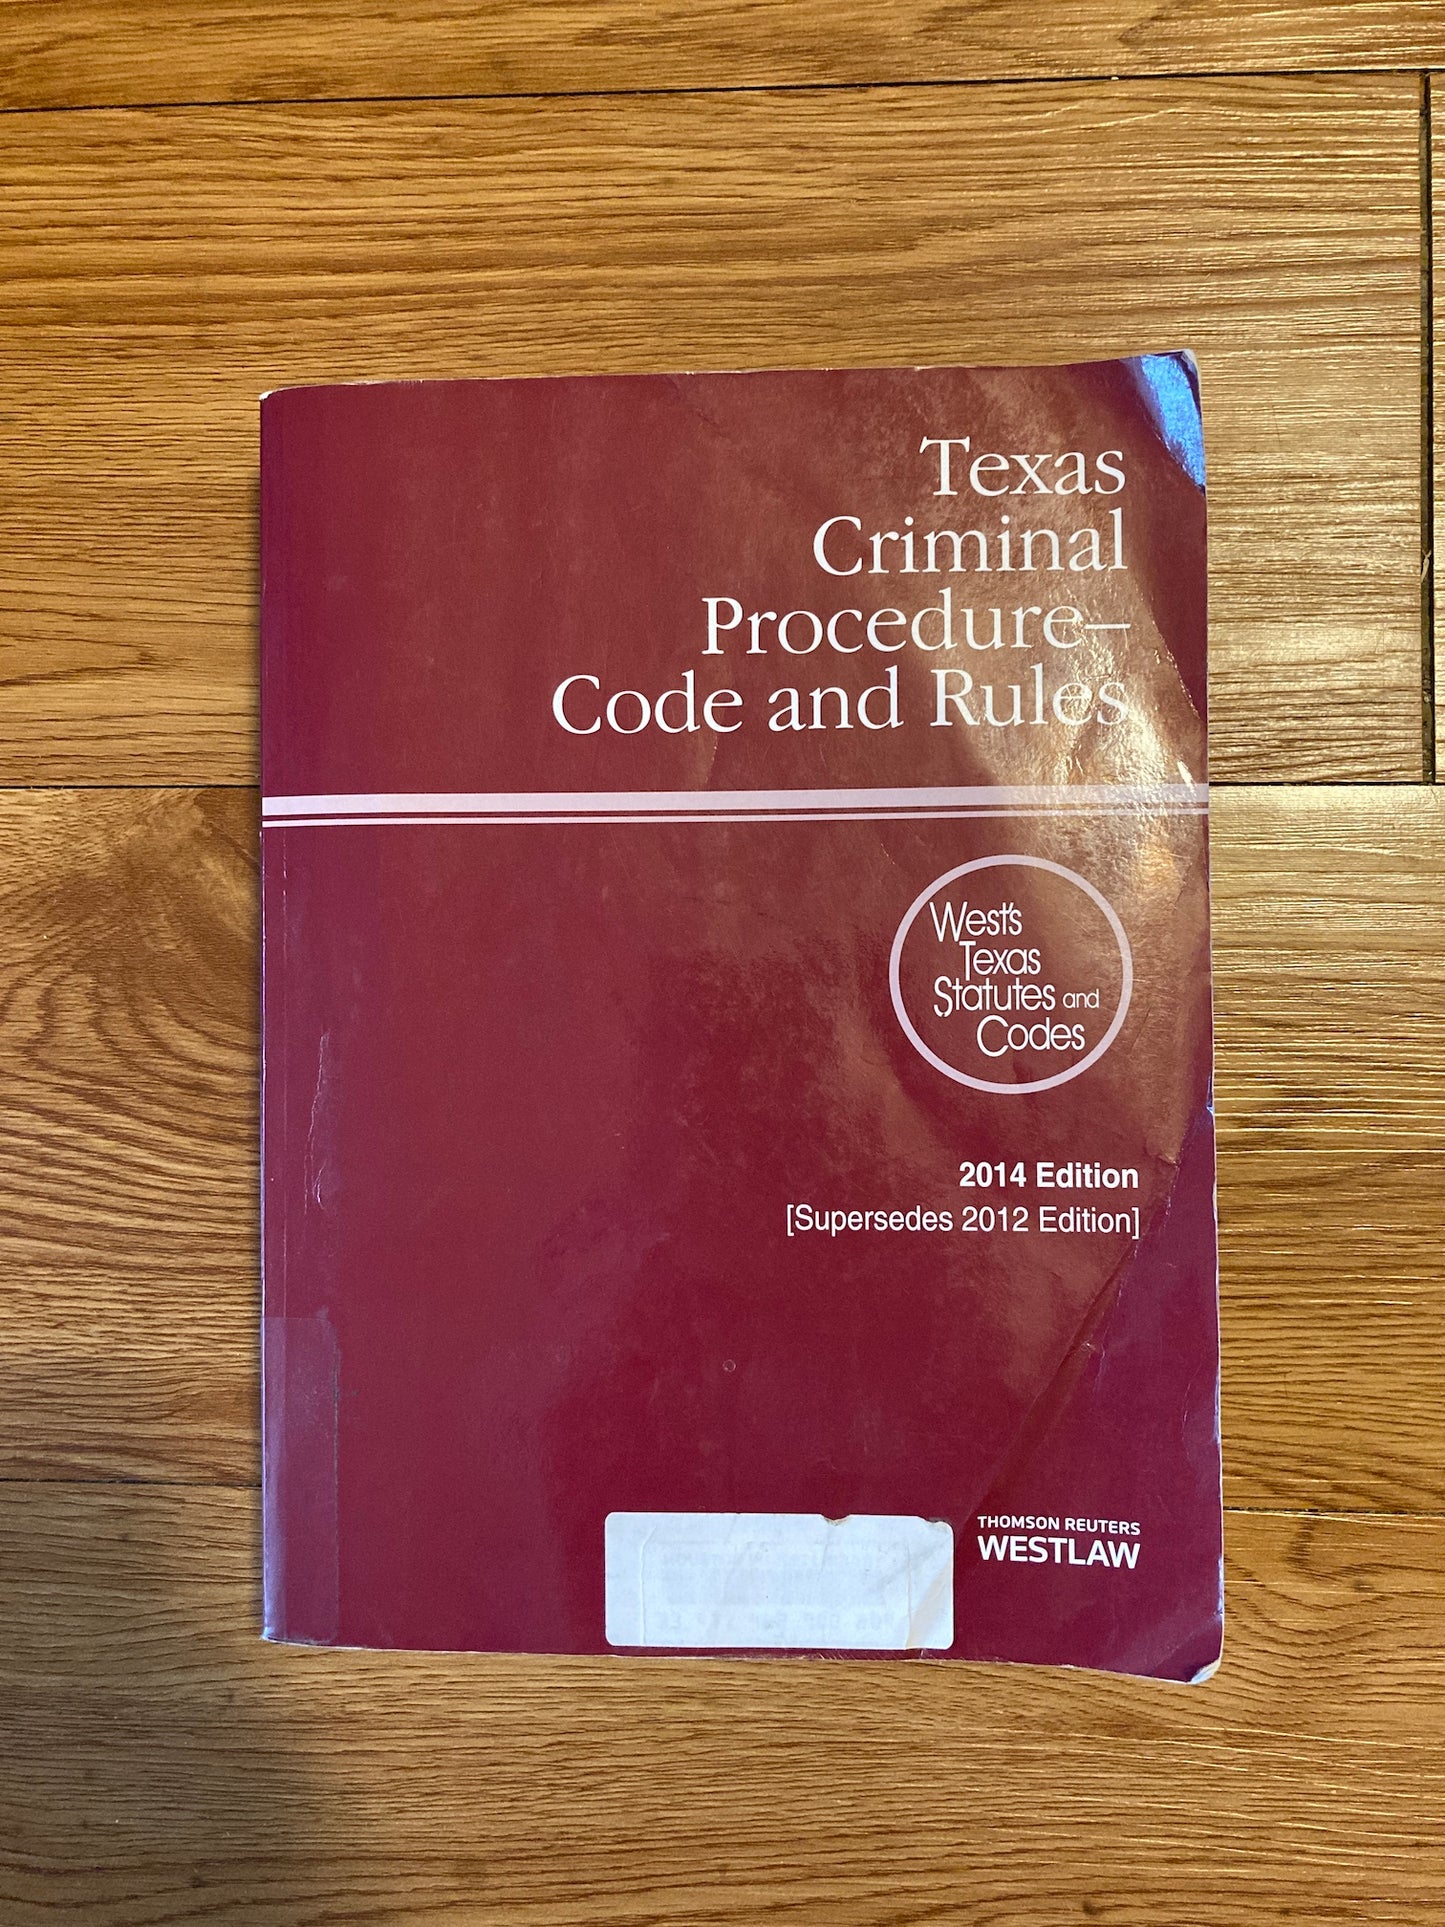 Texas Criminal Procedure-Code and Rules 2014